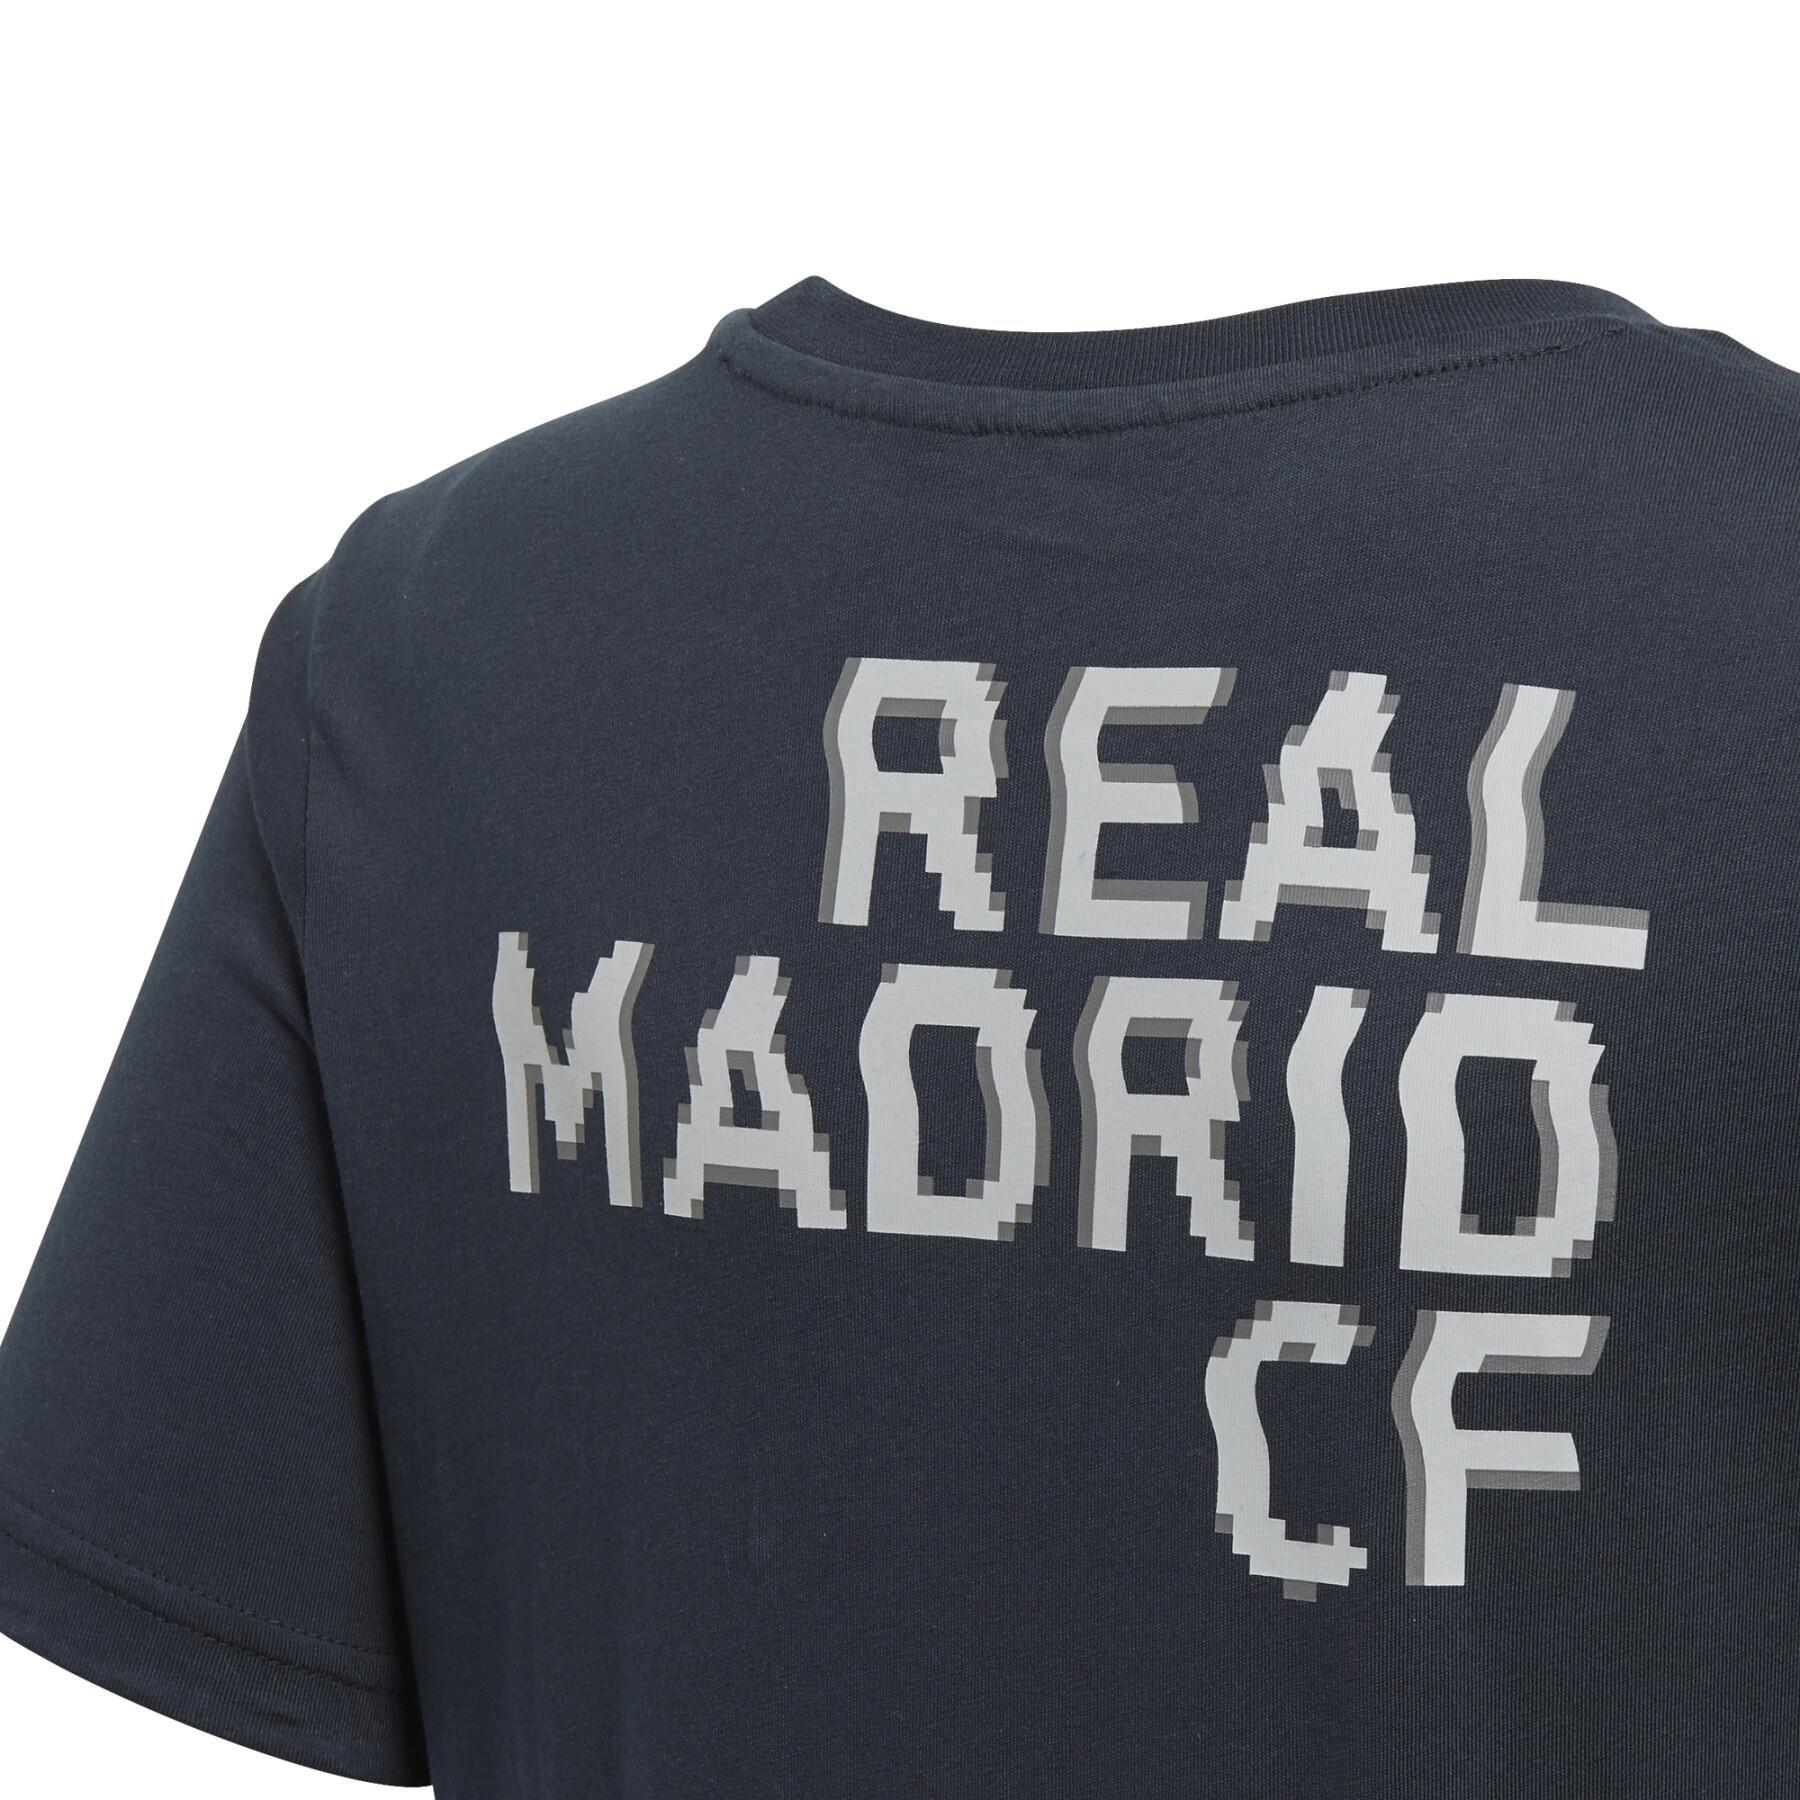 Child's T-shirt Real Madrid Graphic